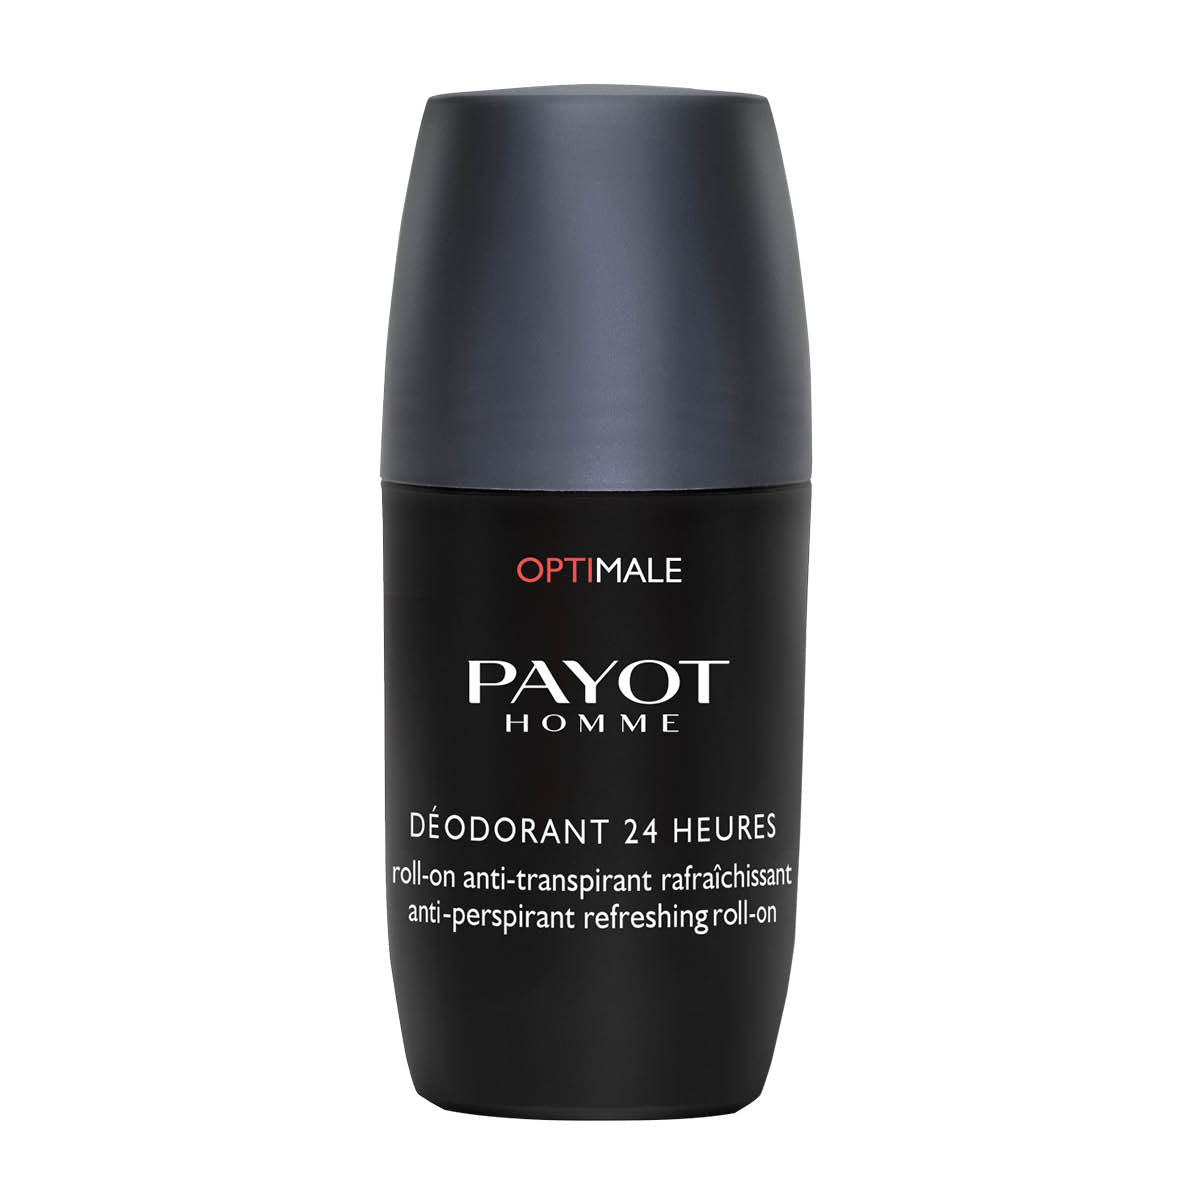 Payot 24 Hour Roll-on Deodorant 75ml